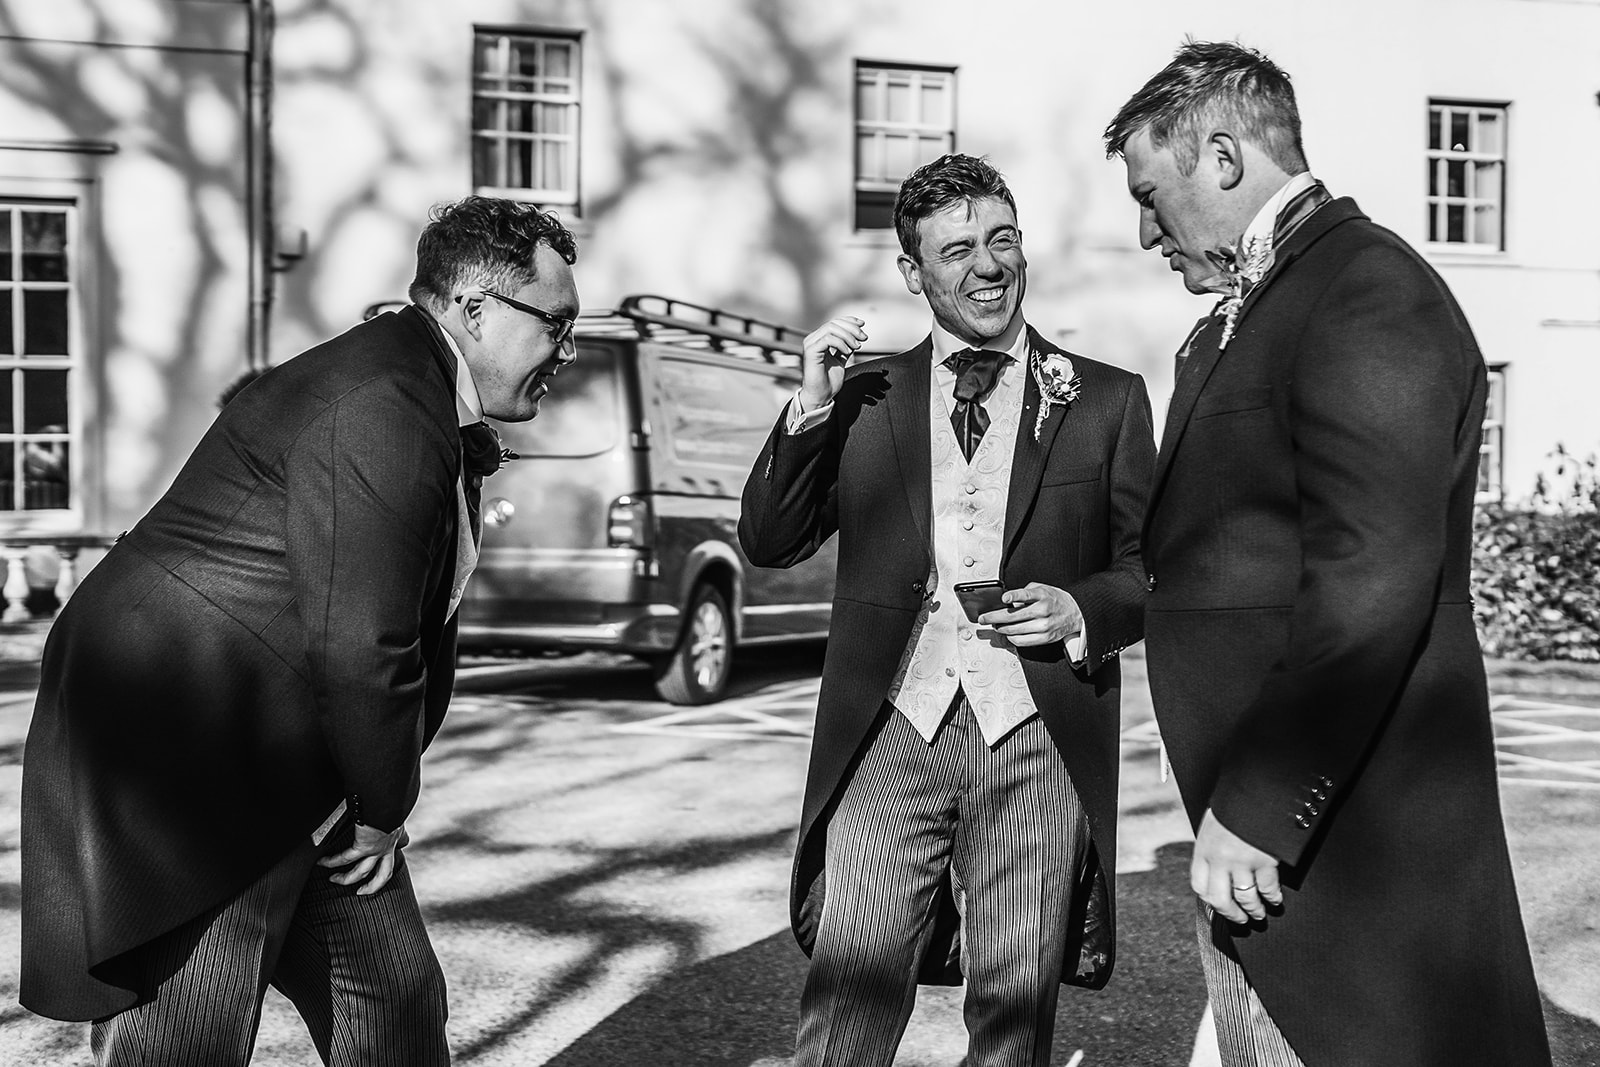 A groom and his groomsmen laughing